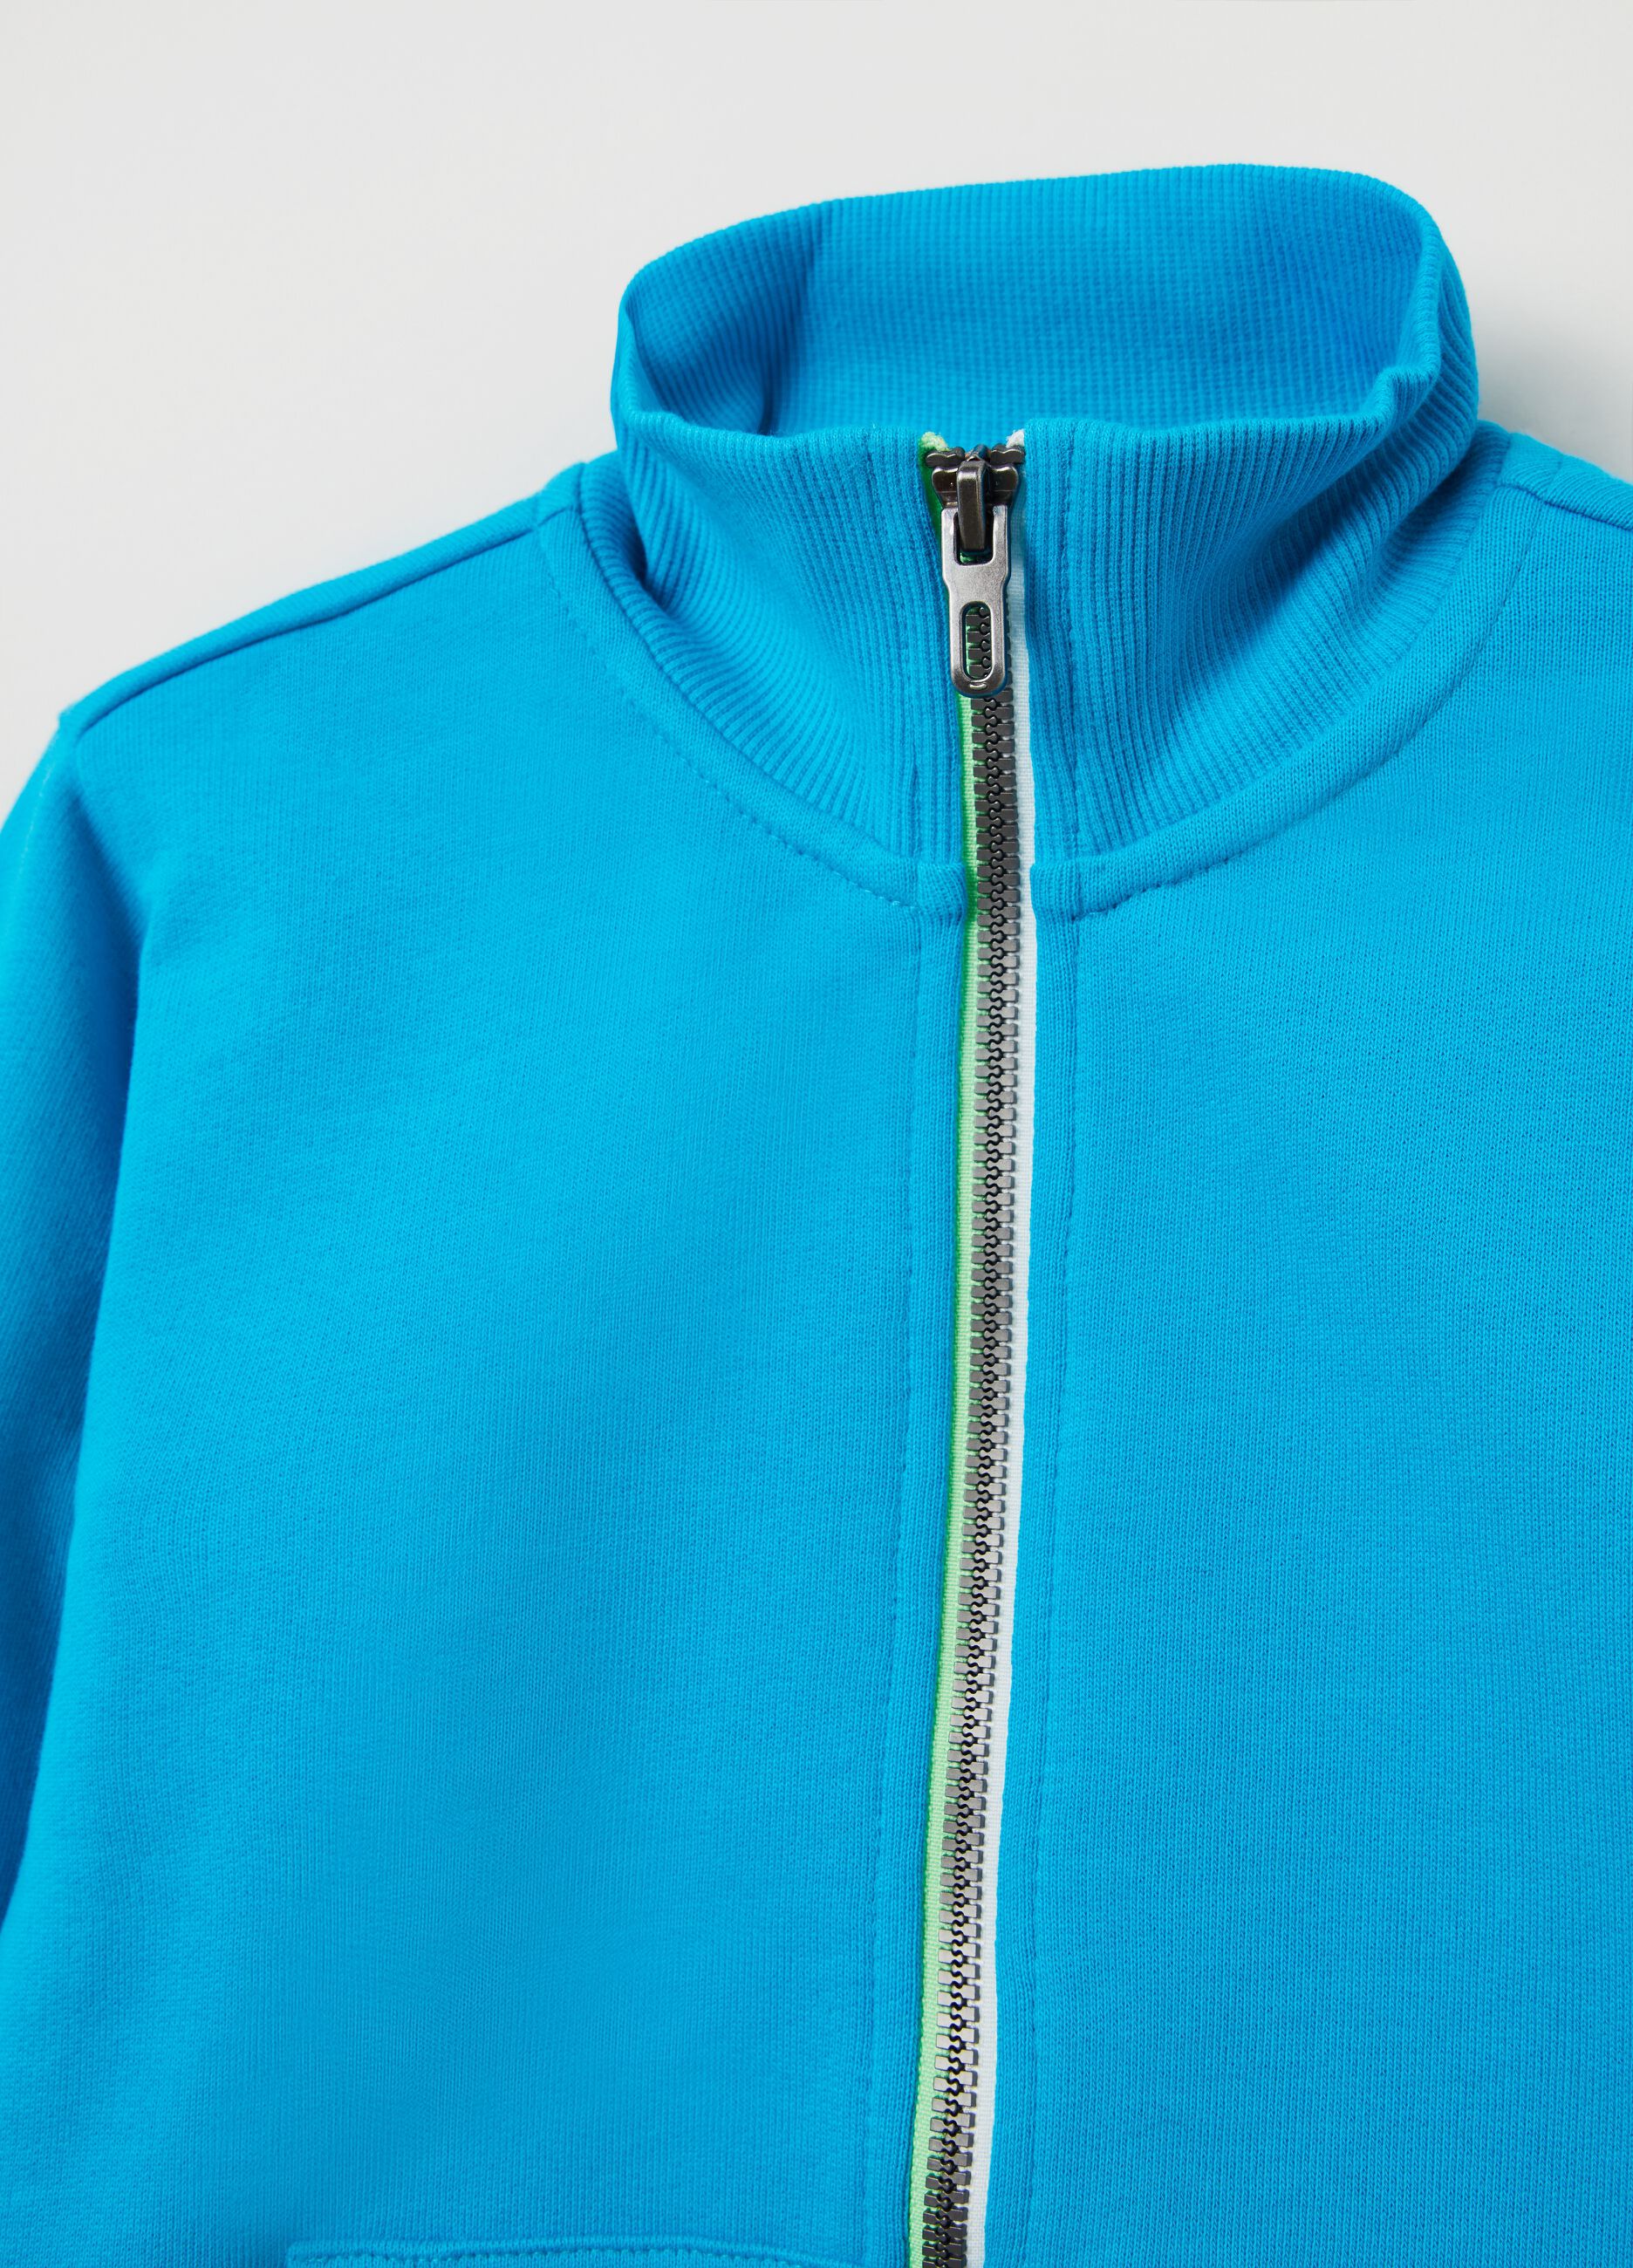 Full-zip plush top with high neck